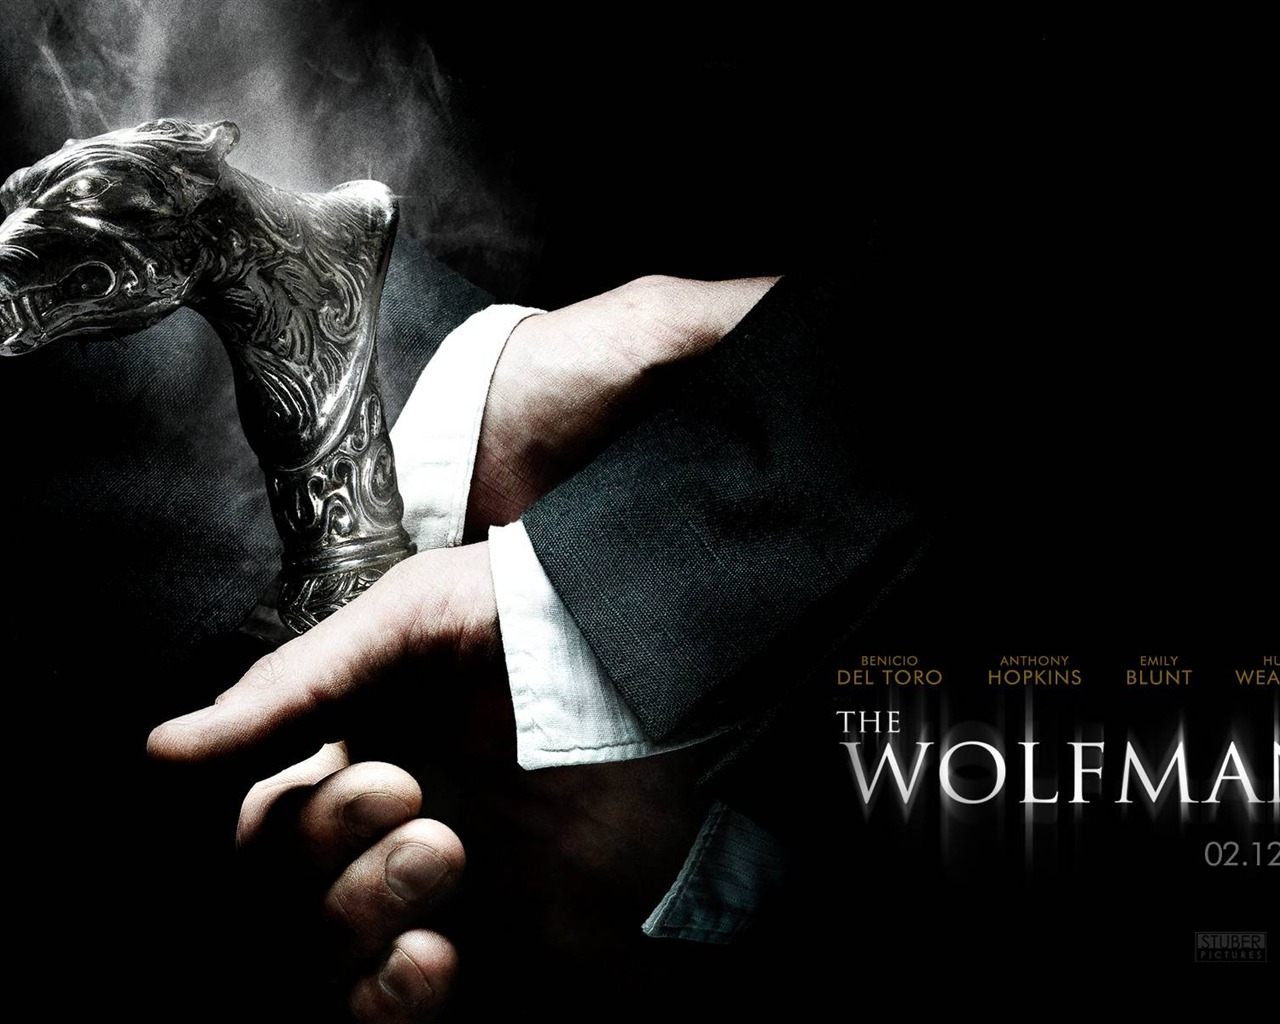 The Wolfman Movie Wallpapers #7 - 1280x1024